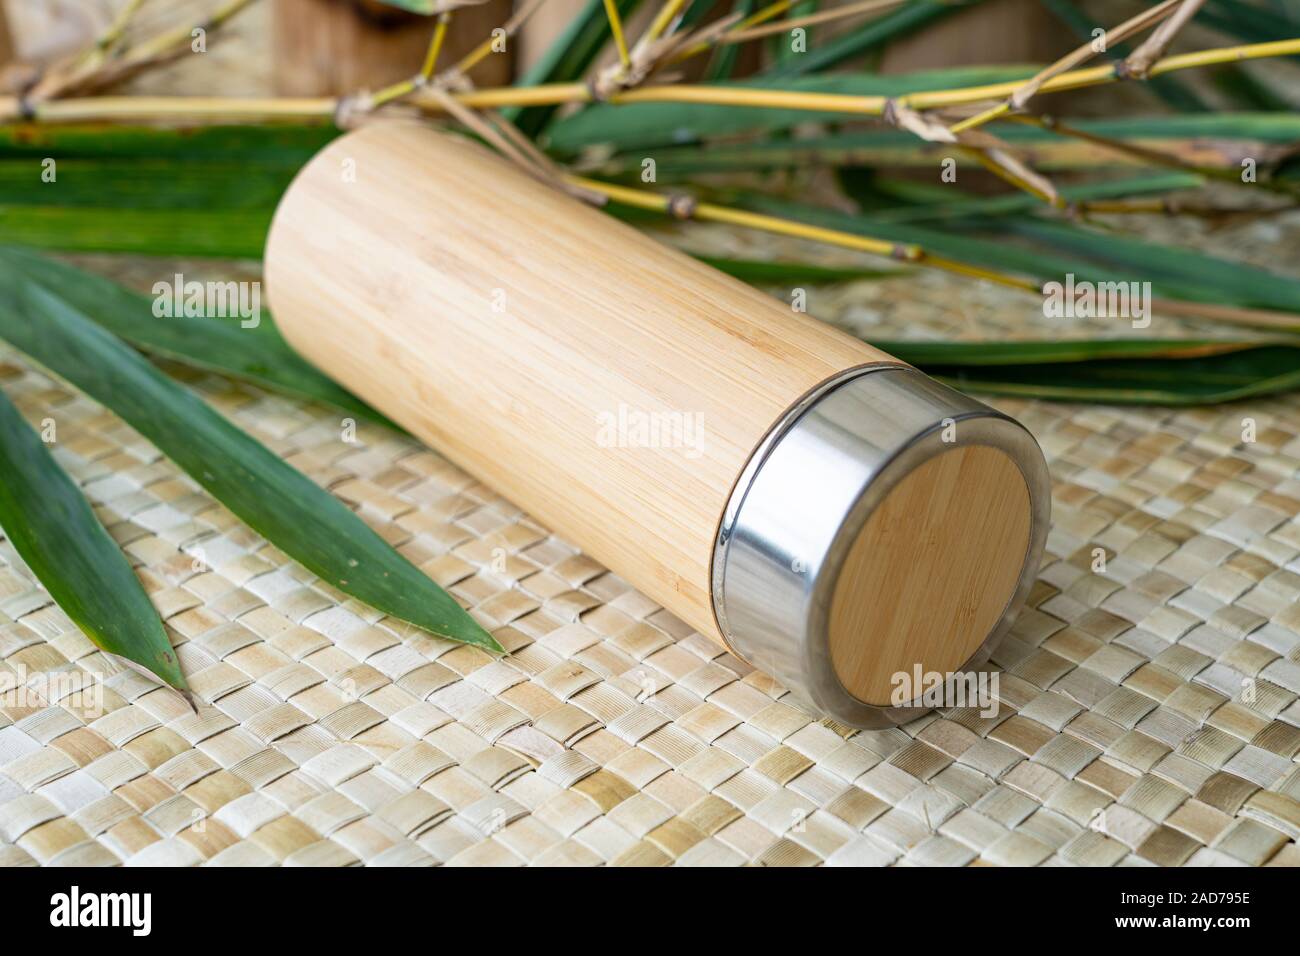 A handcrafted biodegradable drinking tumbler made in the Philippines from sustainable bamboo sources. Stock Photo